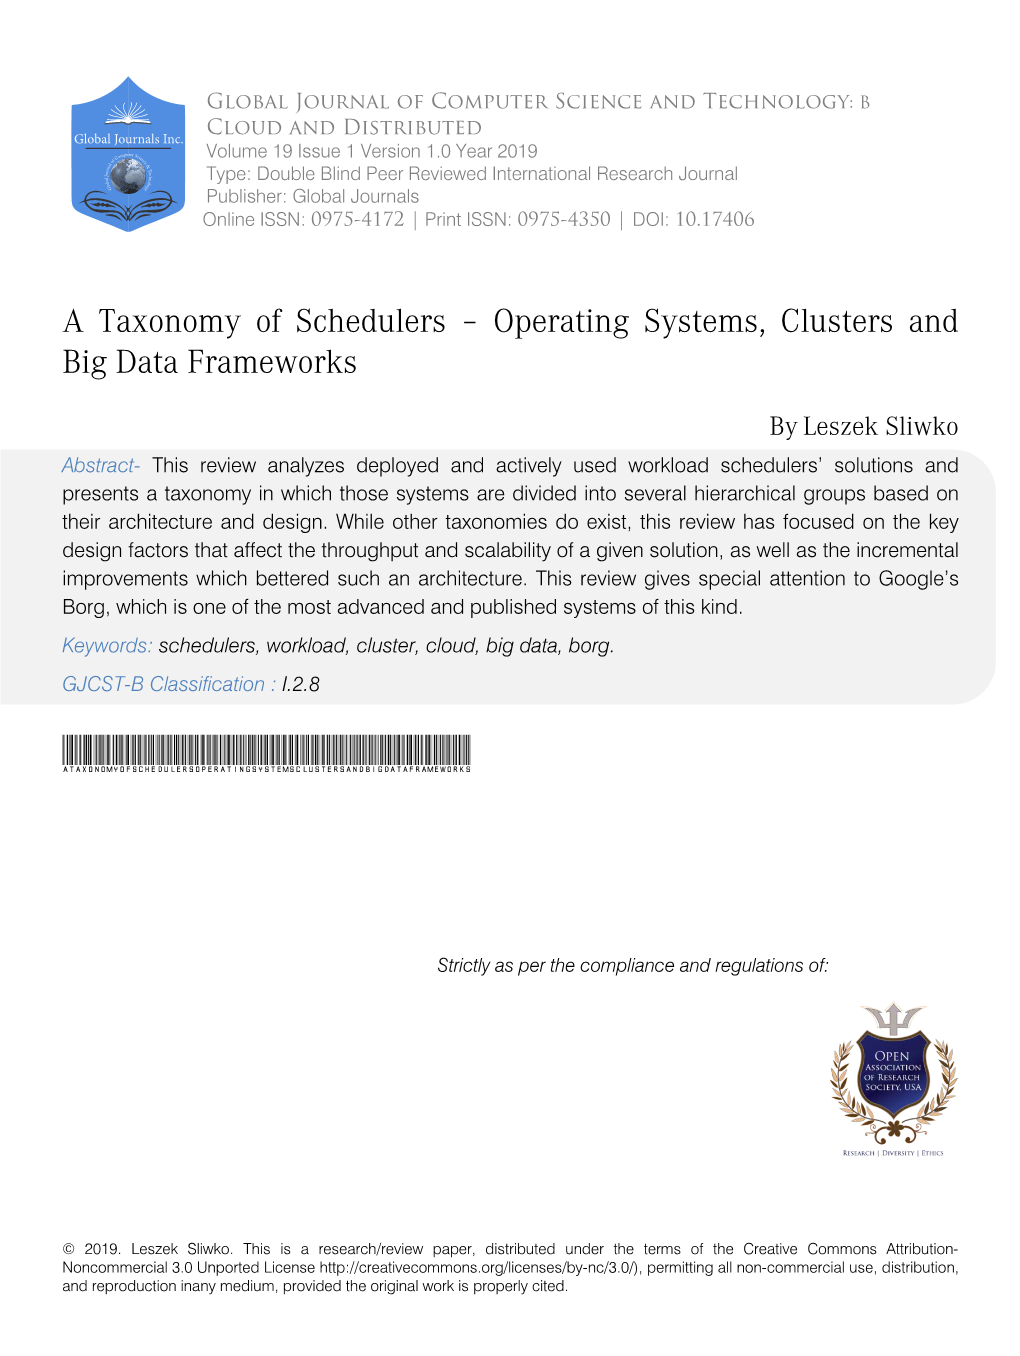 A Taxonomy of Schedulers – Operating Systems, Clusters and Big Data Frameworks